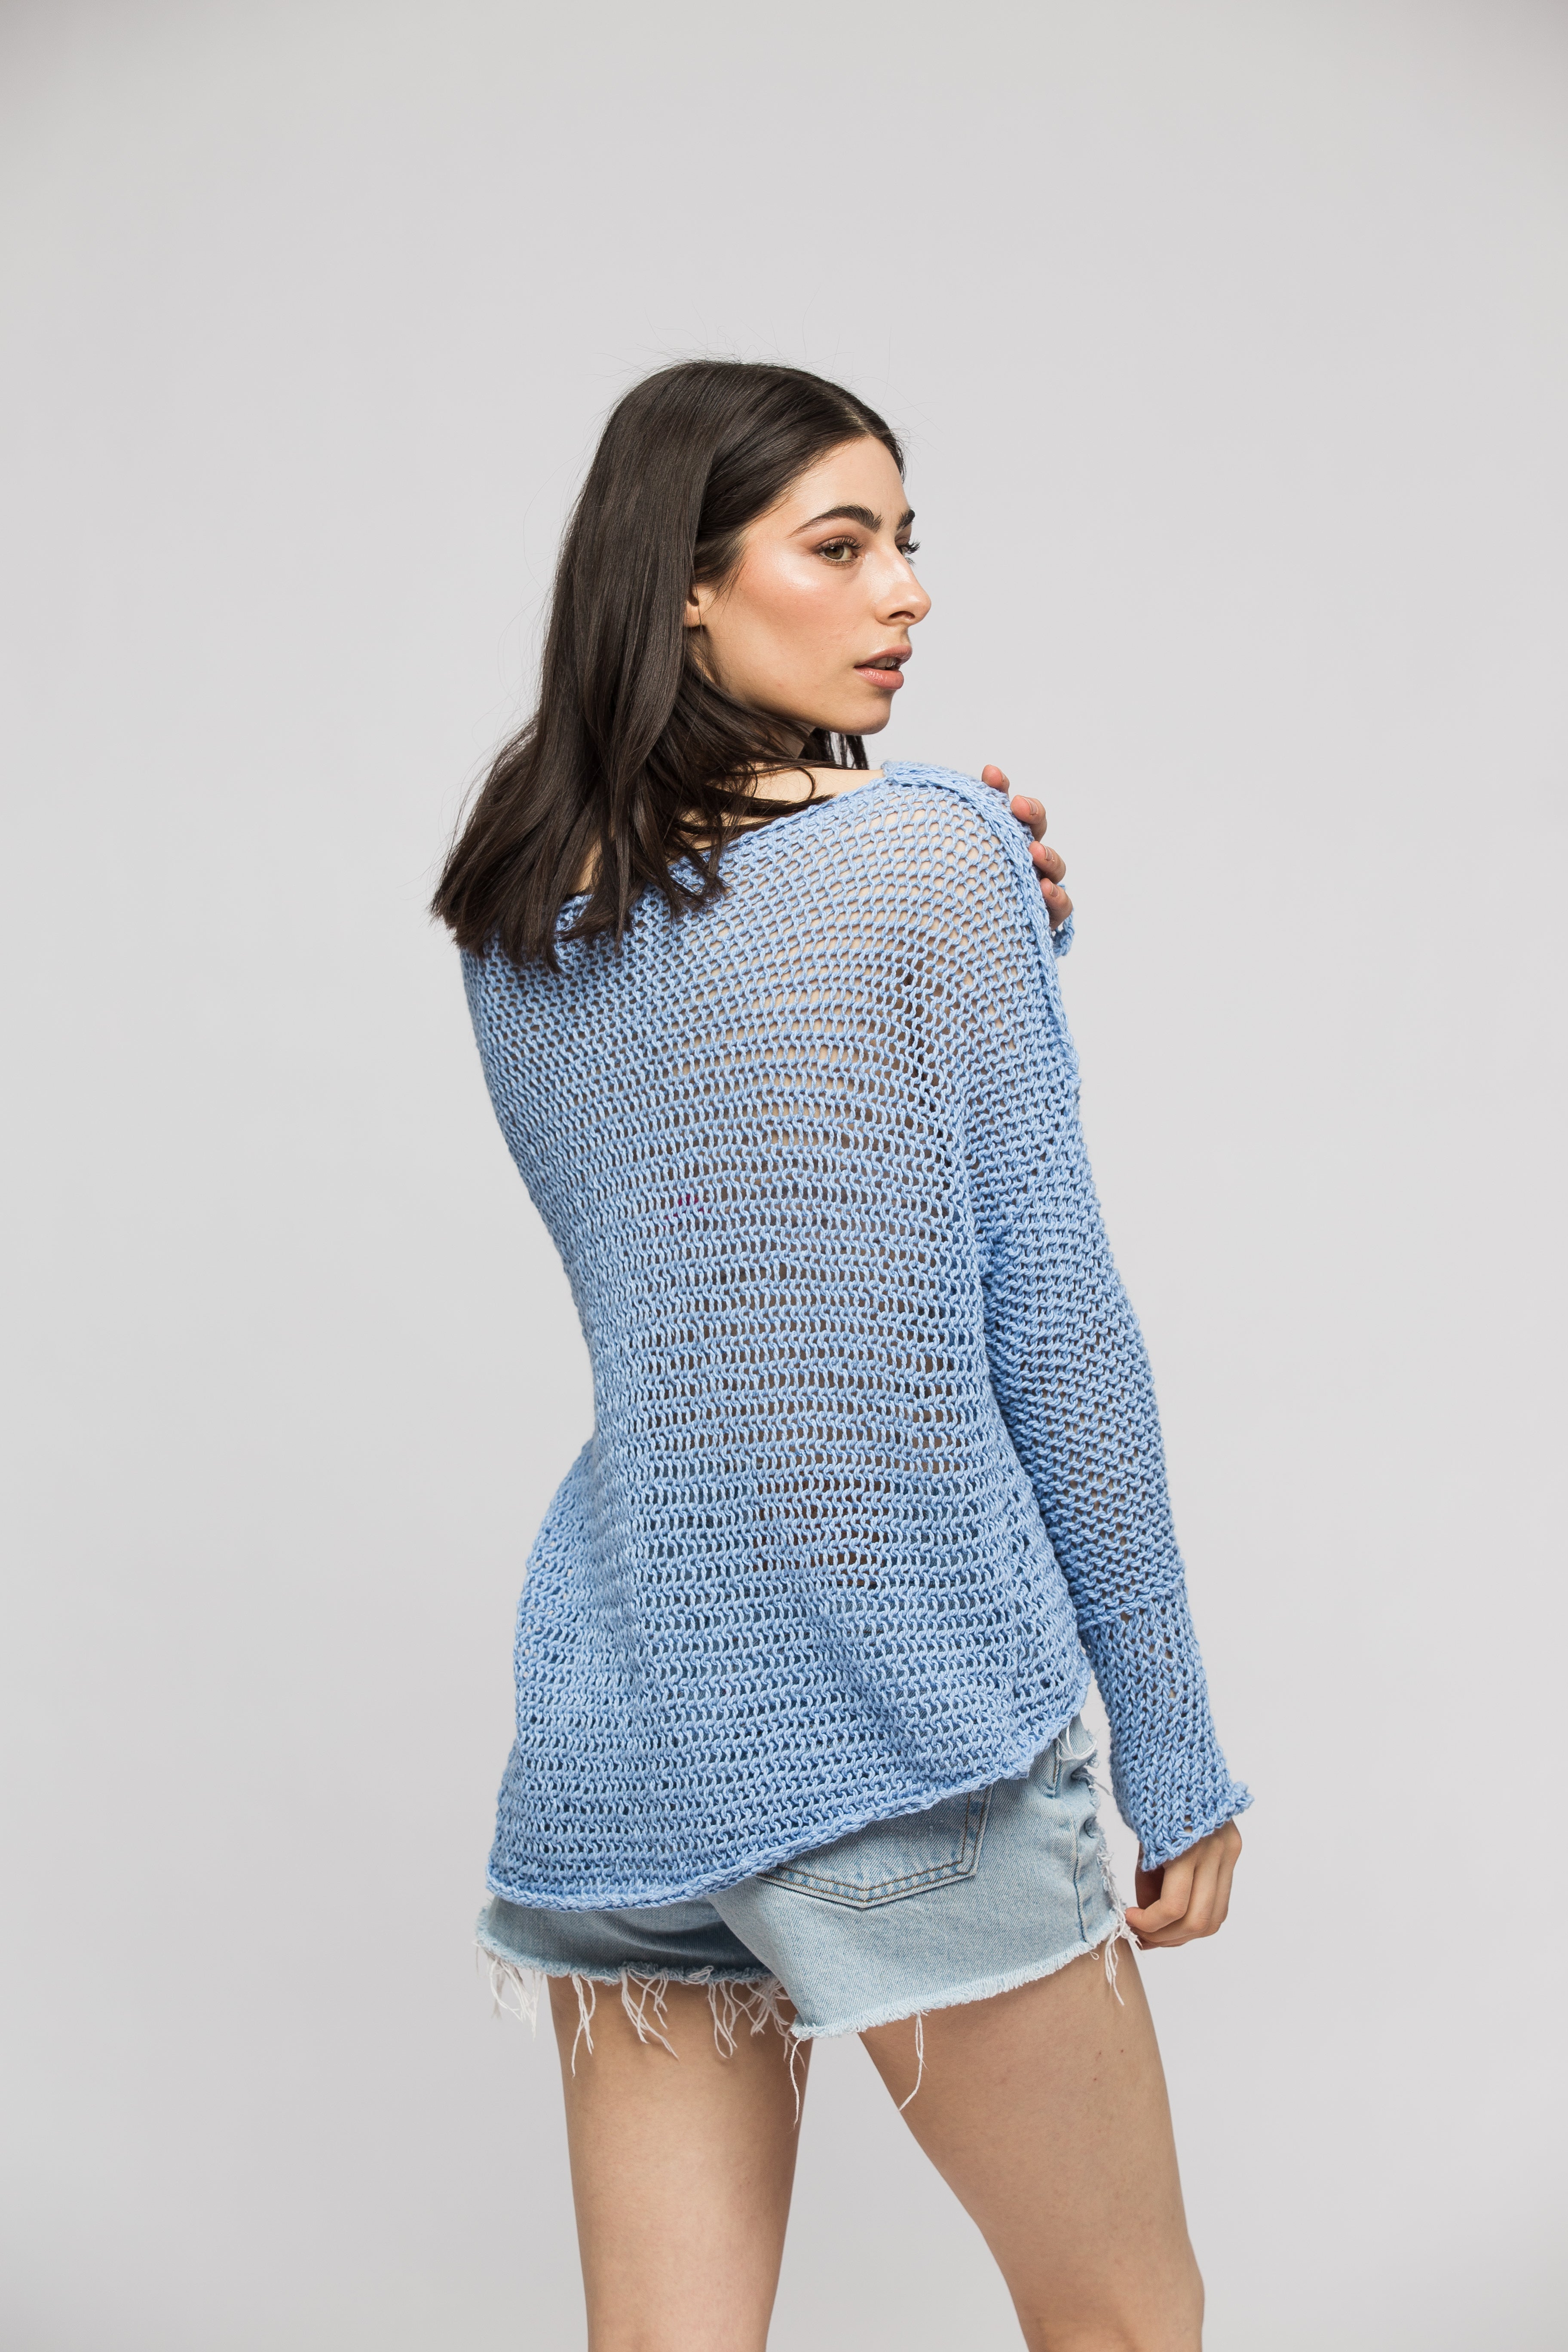 Cotton Linen Blend Blue Sweater - also in Cream / Beige / Black / Grey and Yellow